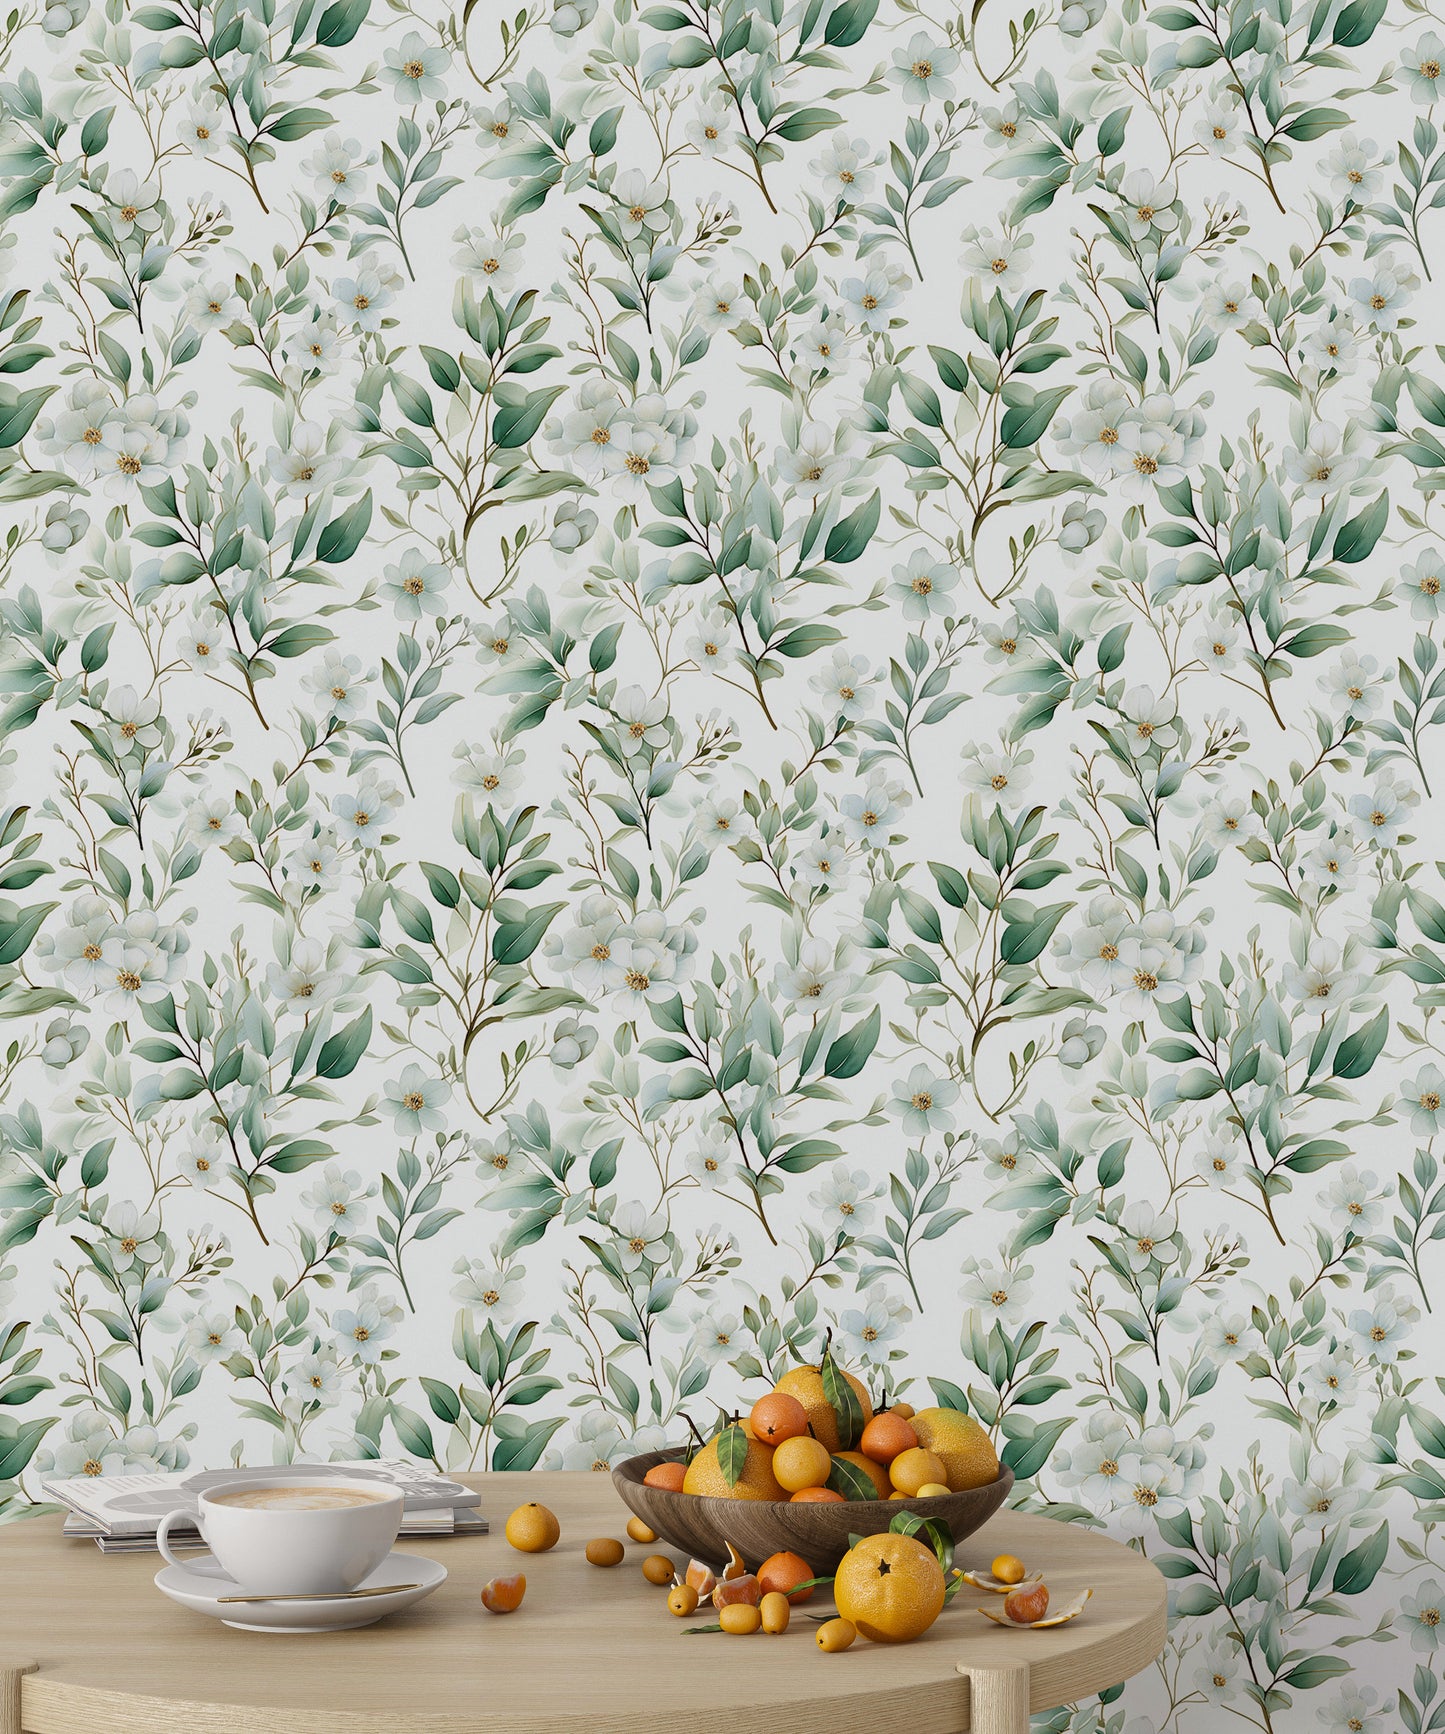 Removable Floral Wallpaper - Eco-Friendly and Stylish